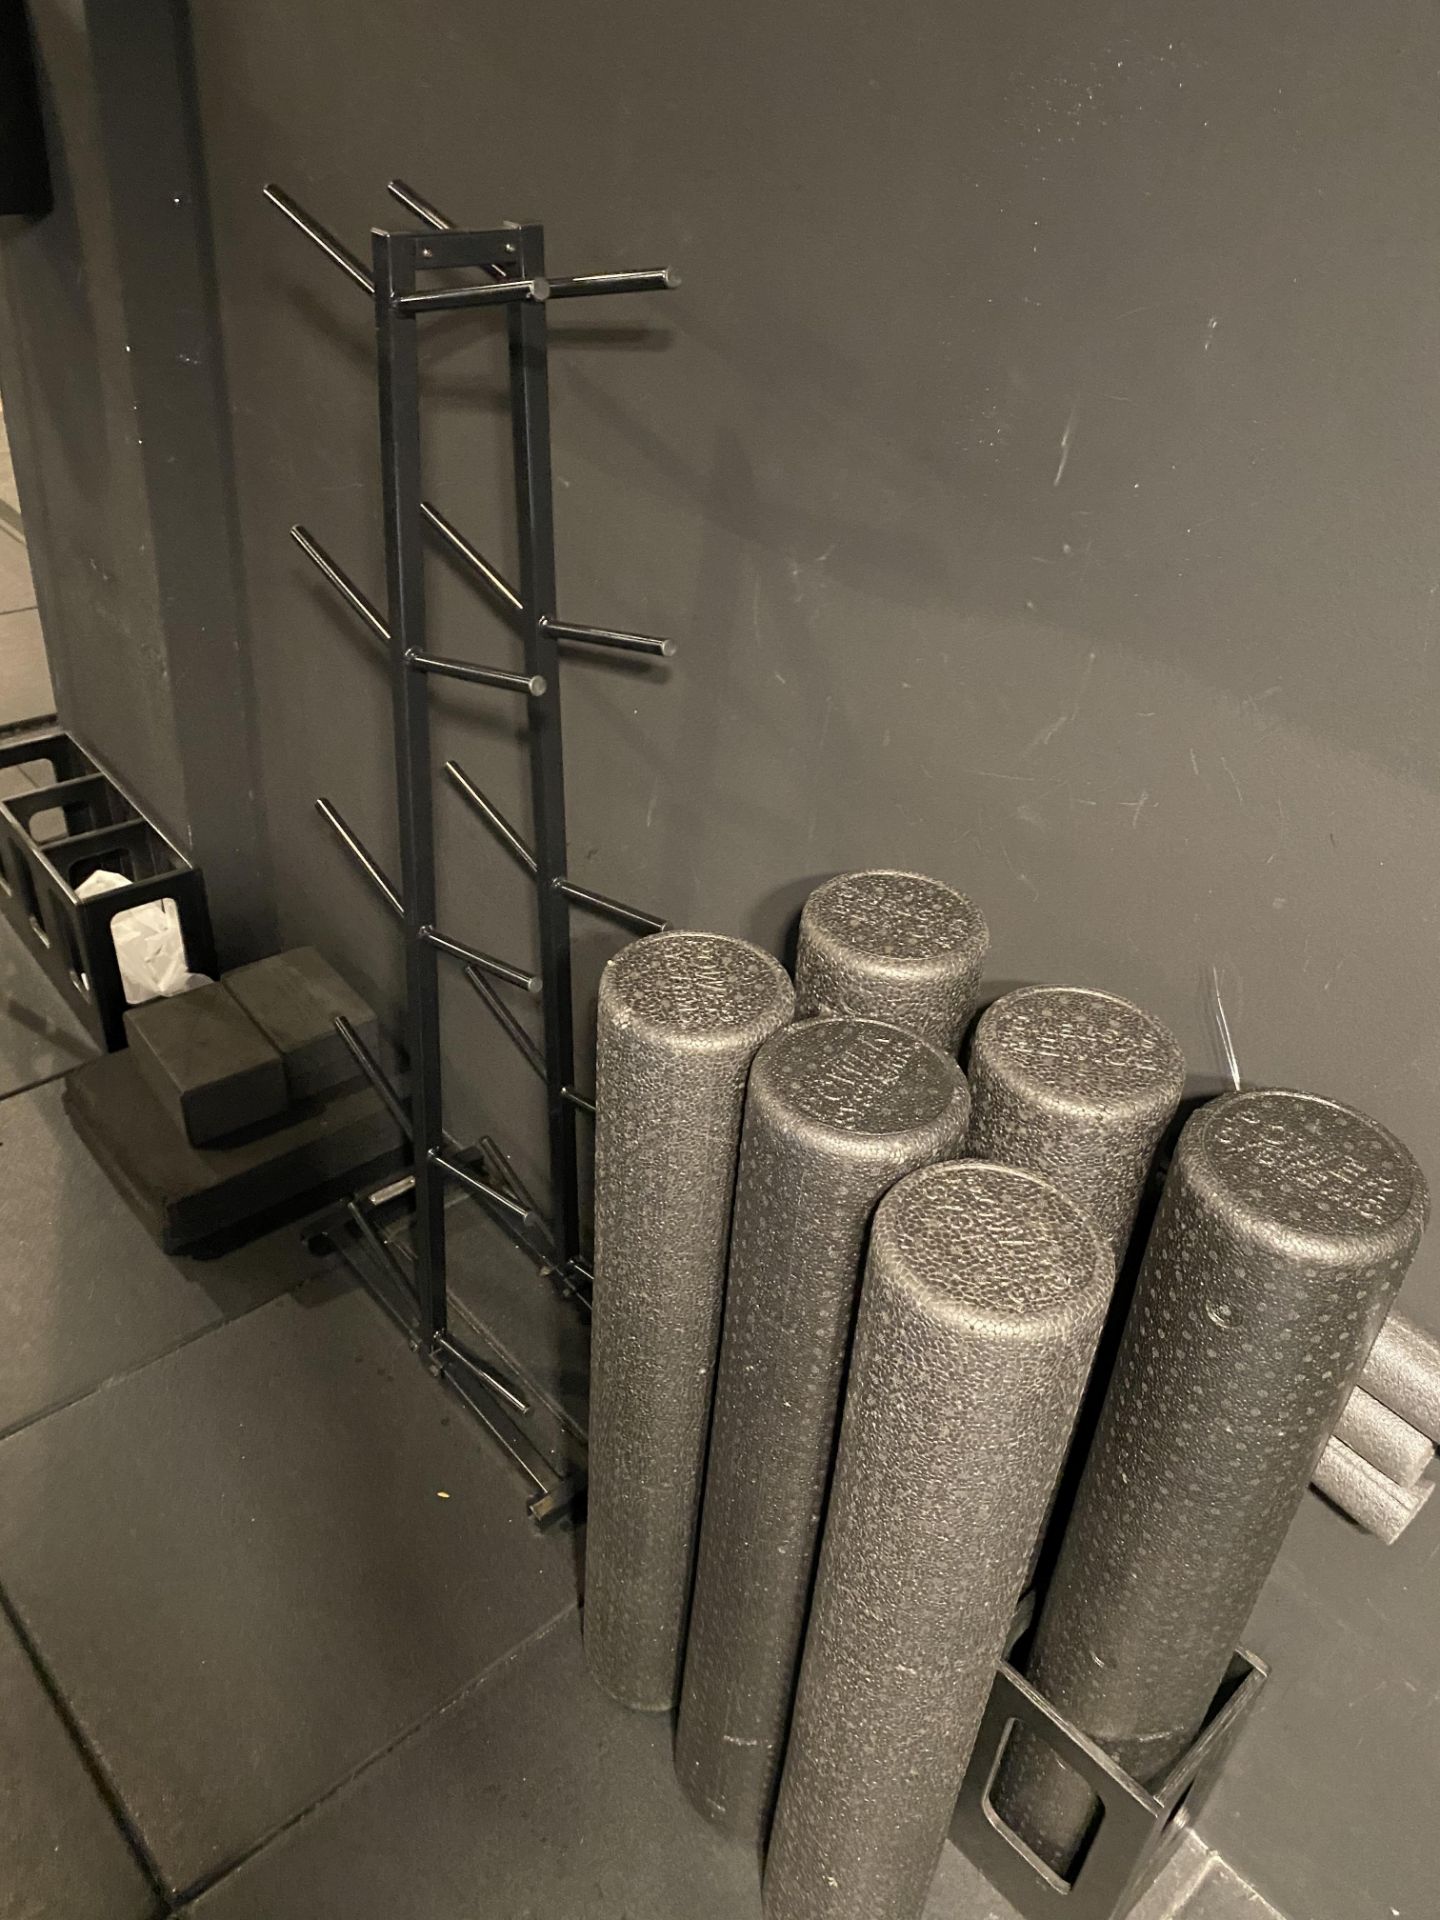 {LOT} Foam Rollers, VTX 2 to 5 Lb. Weights, Etc. - Image 2 of 2